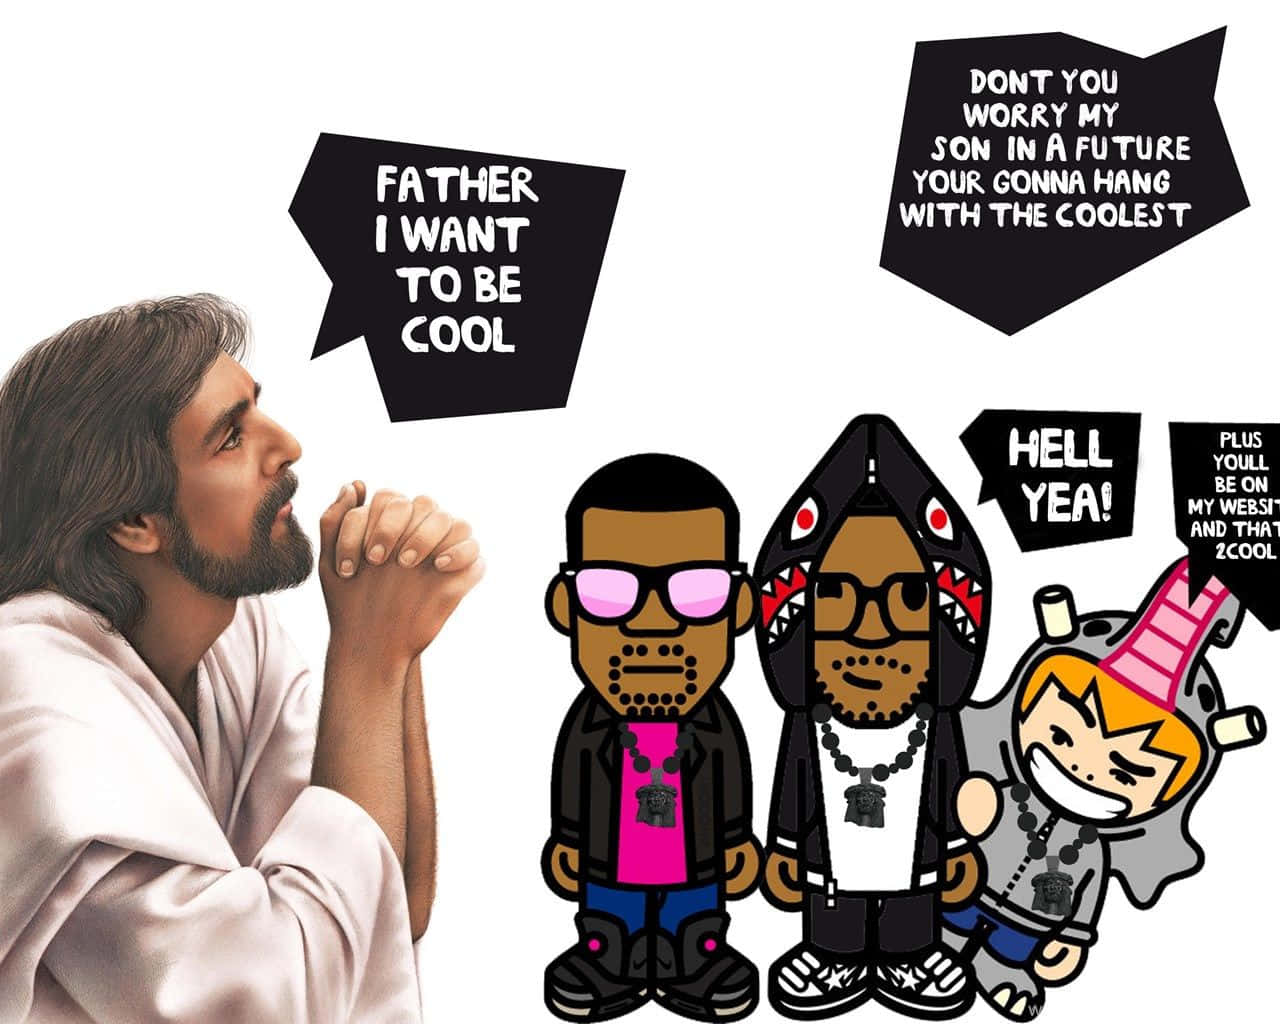 Find Peace, Joy, Hope And Love In The Teachings Of Cool Jesus. Background